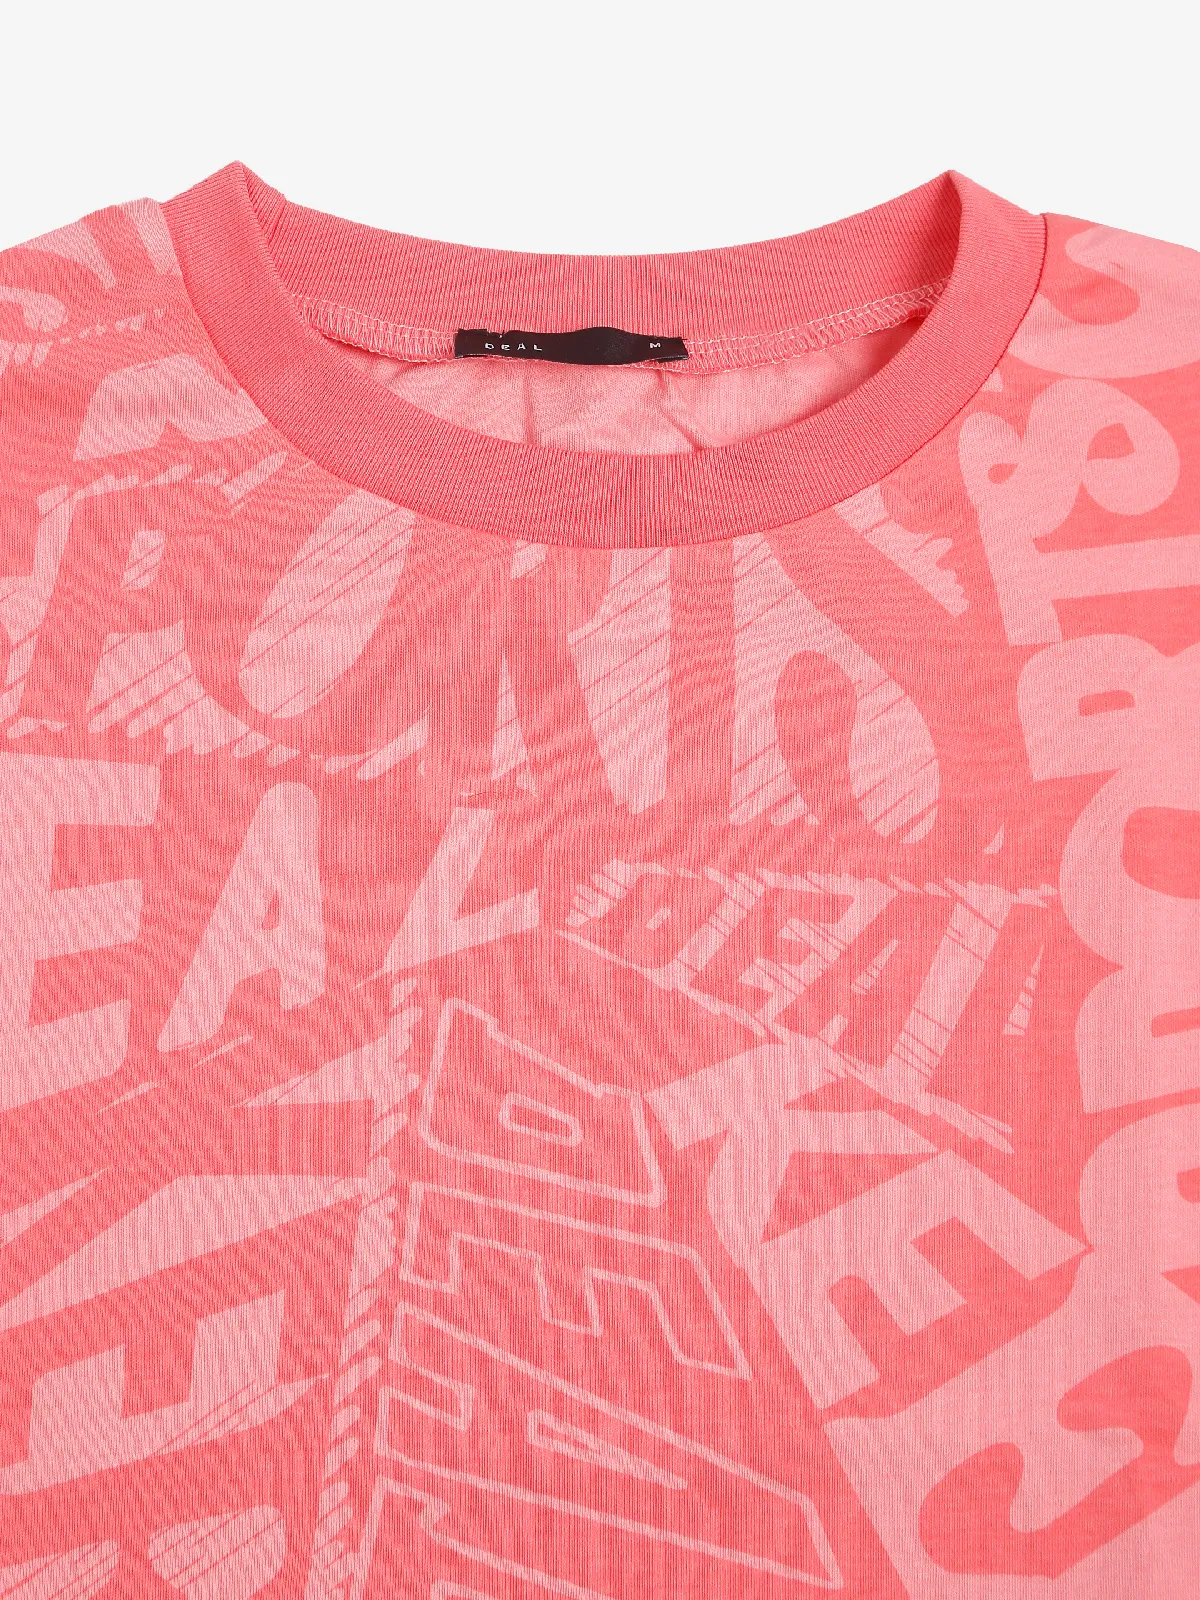 Deal coral pink cotton printed t-shirt